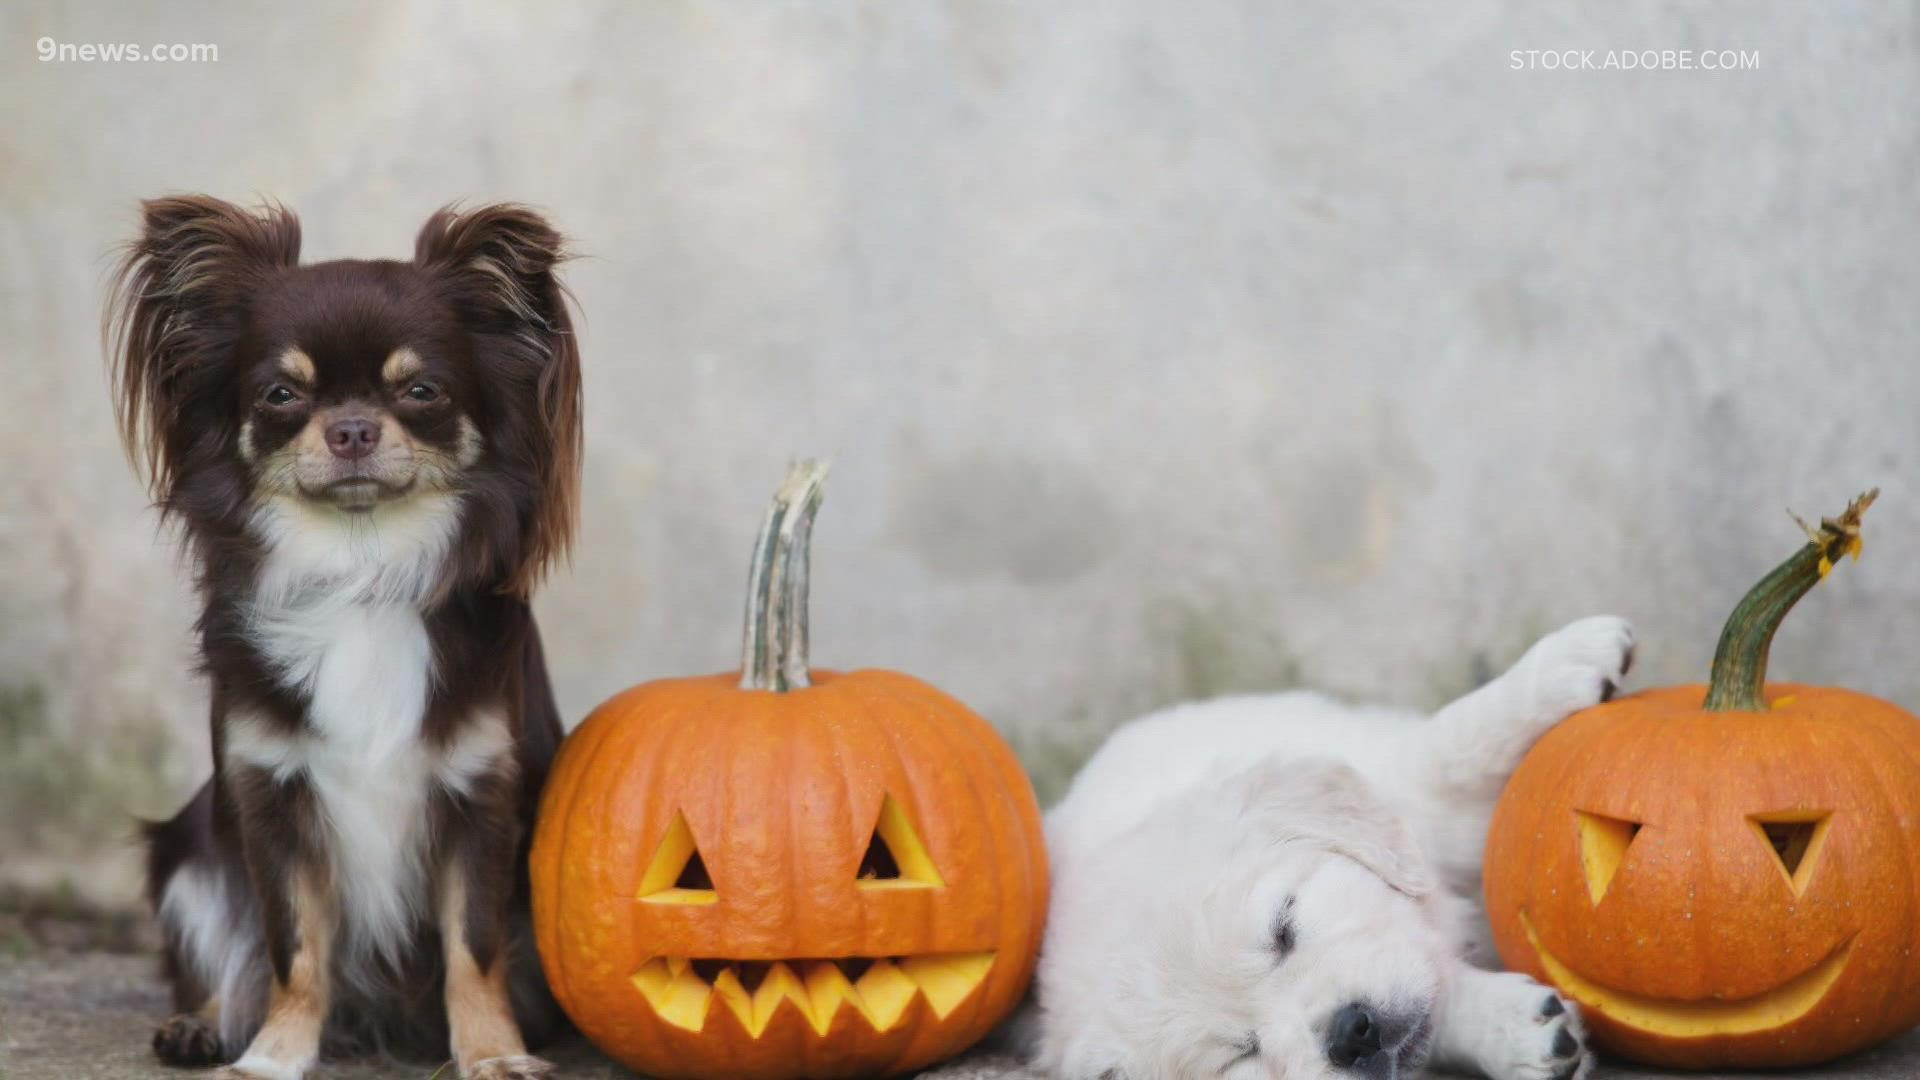 Here are some tips on keeping your pets safe this Halloween.